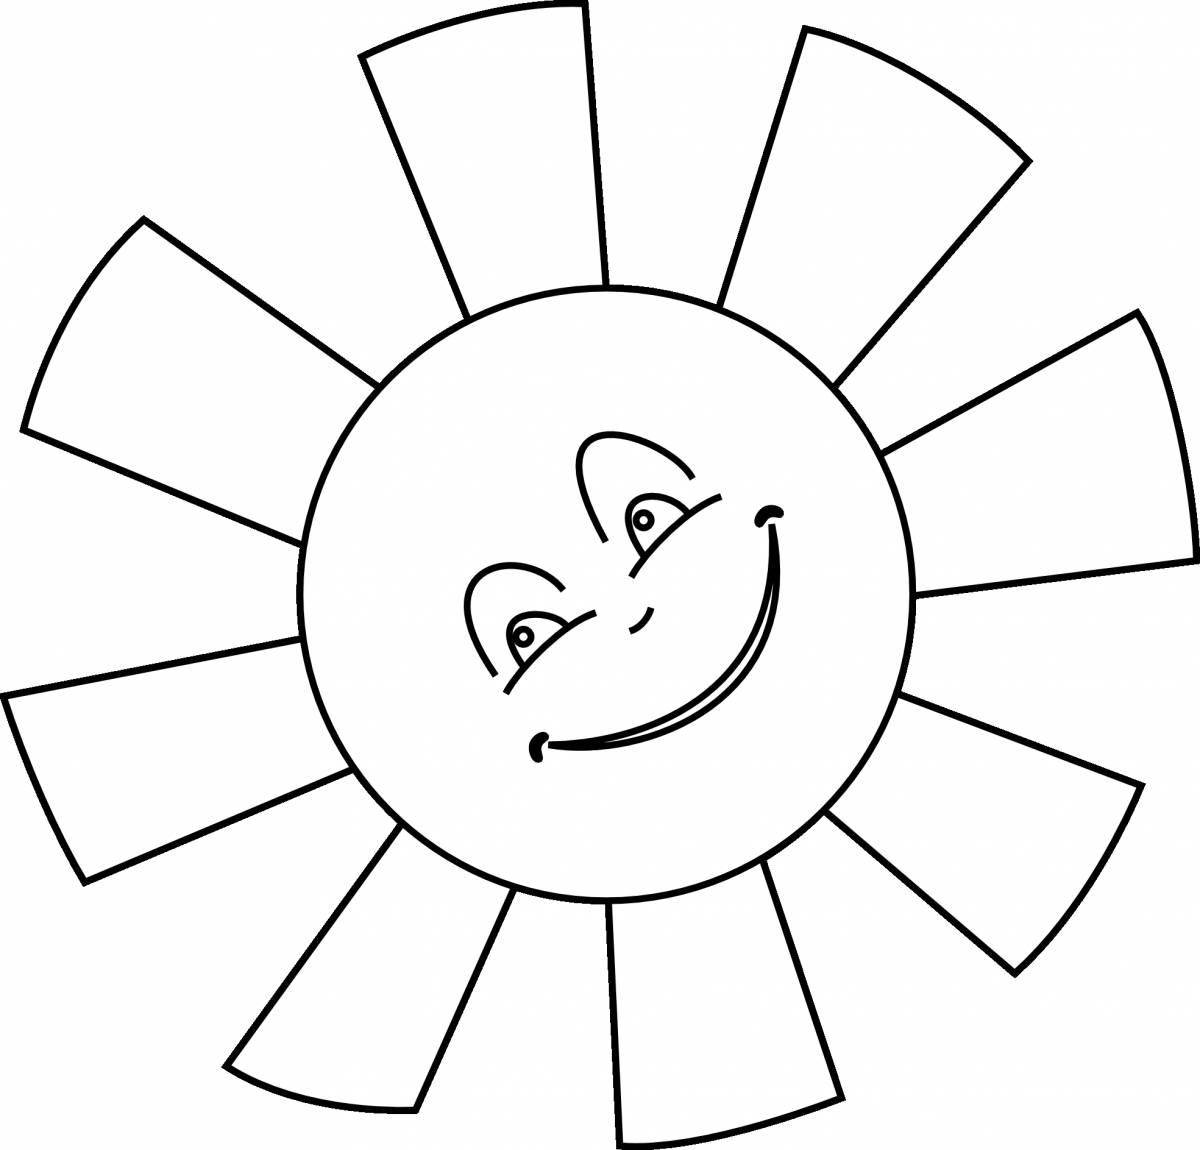 Satisfactory coloring picture sunny picture for kids